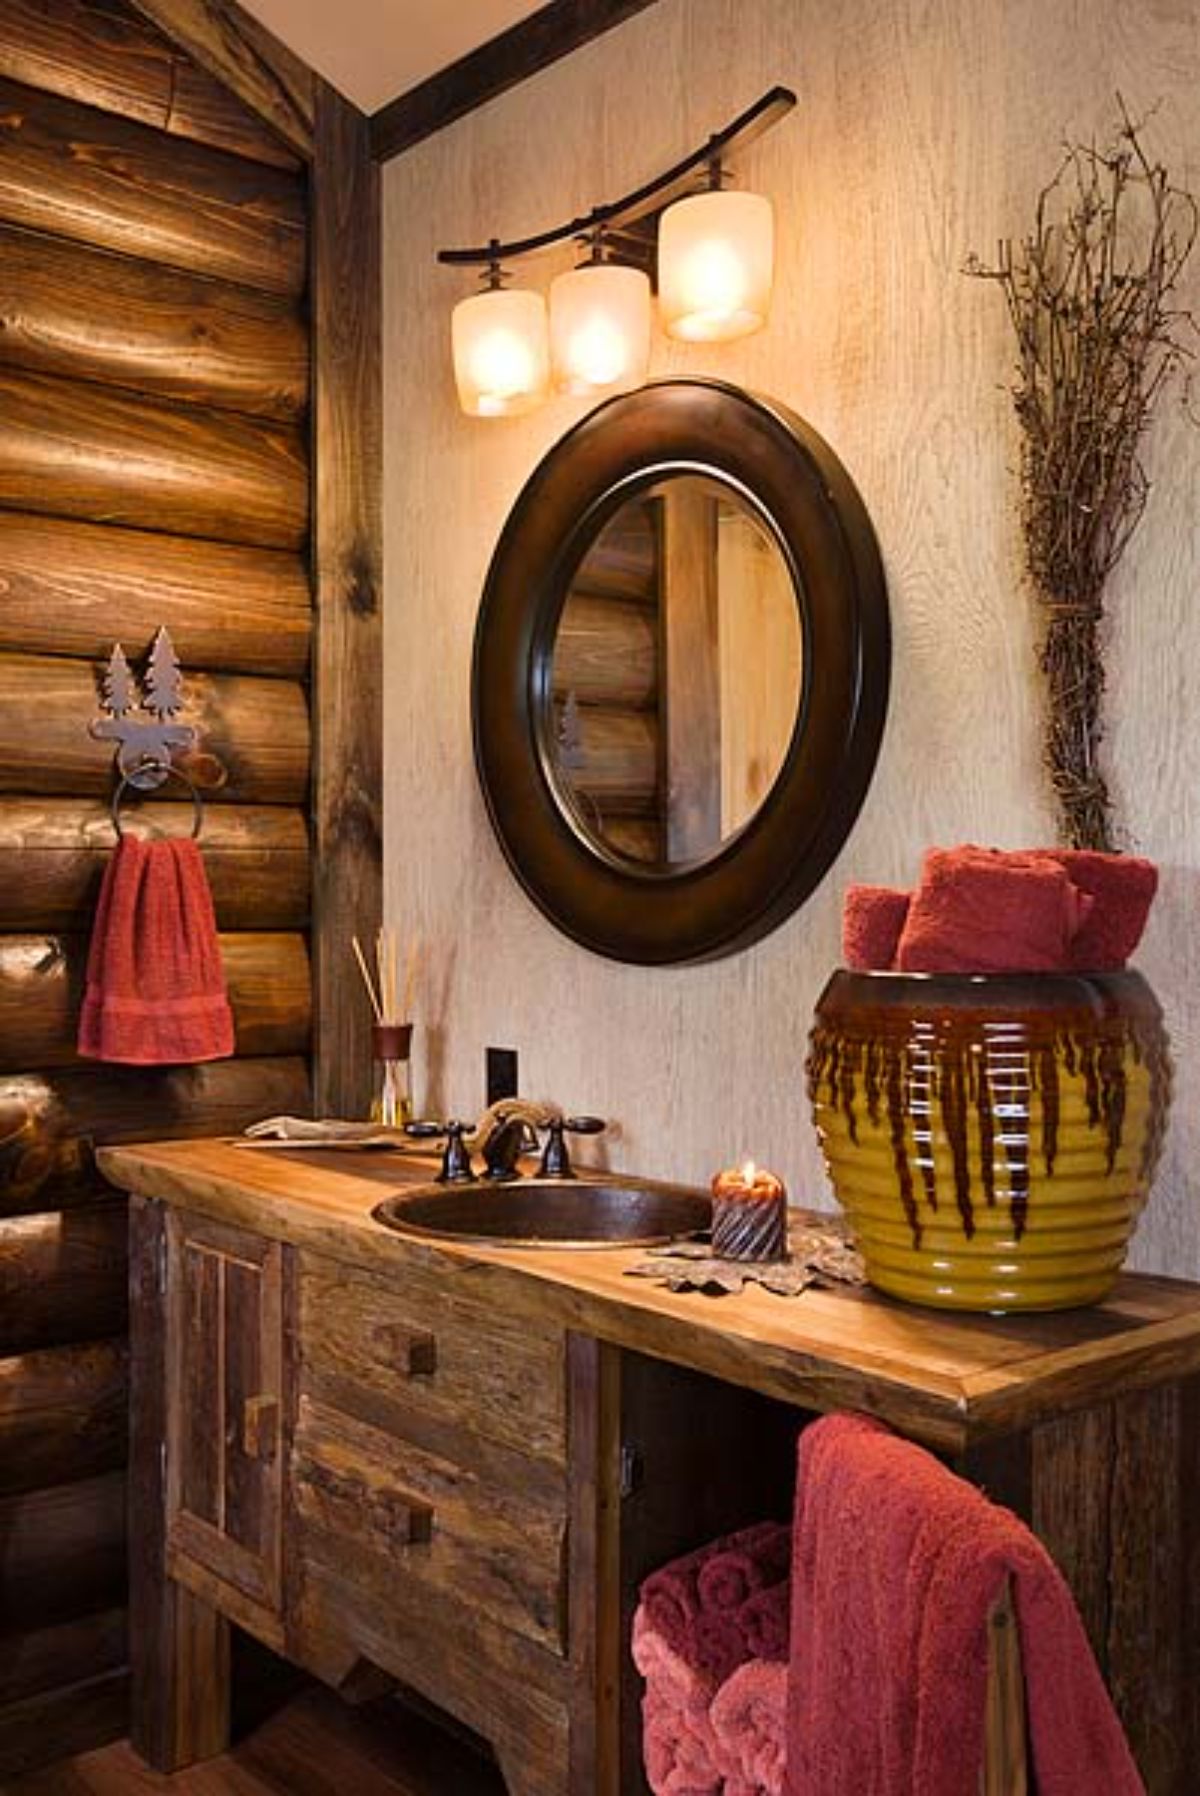 pottery on end of cabinet holding red towels with round mirror above sink against log walls